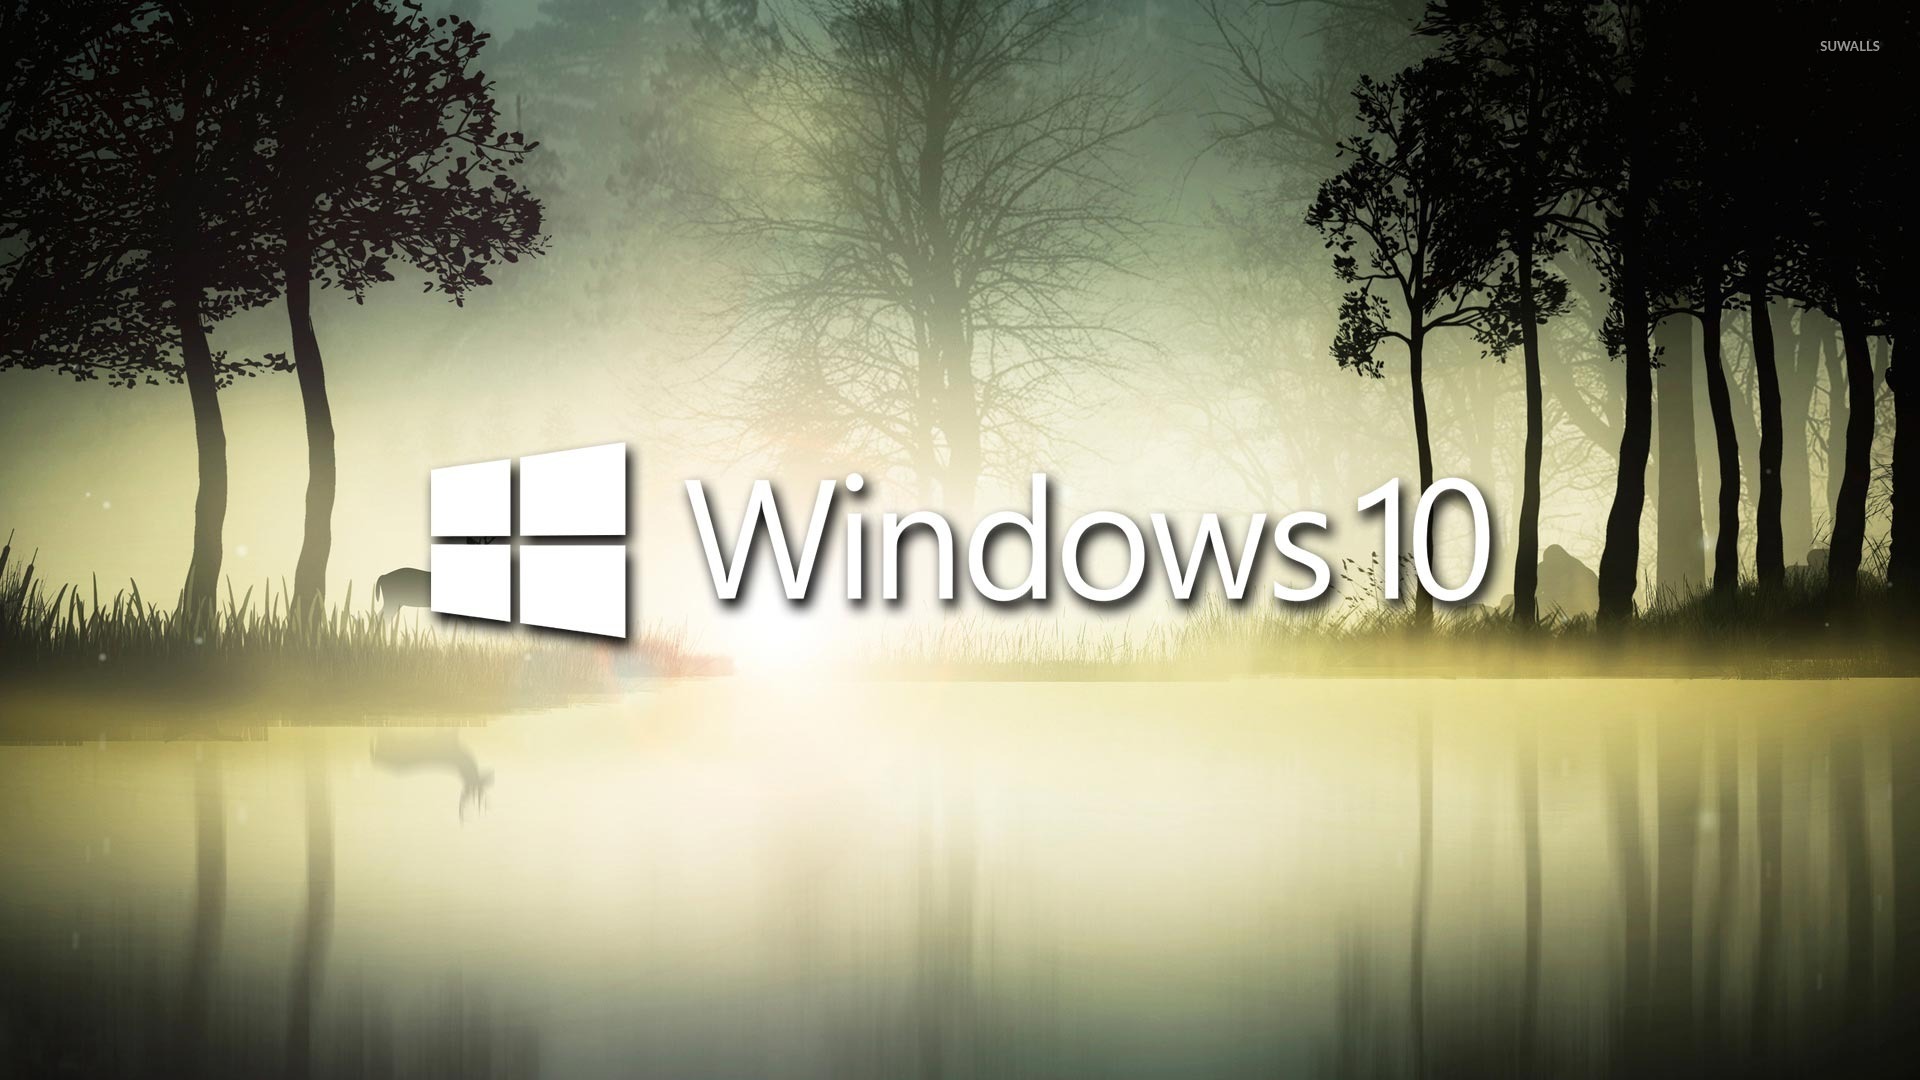 Windows In The Foggy Forest Wallpaper Puter